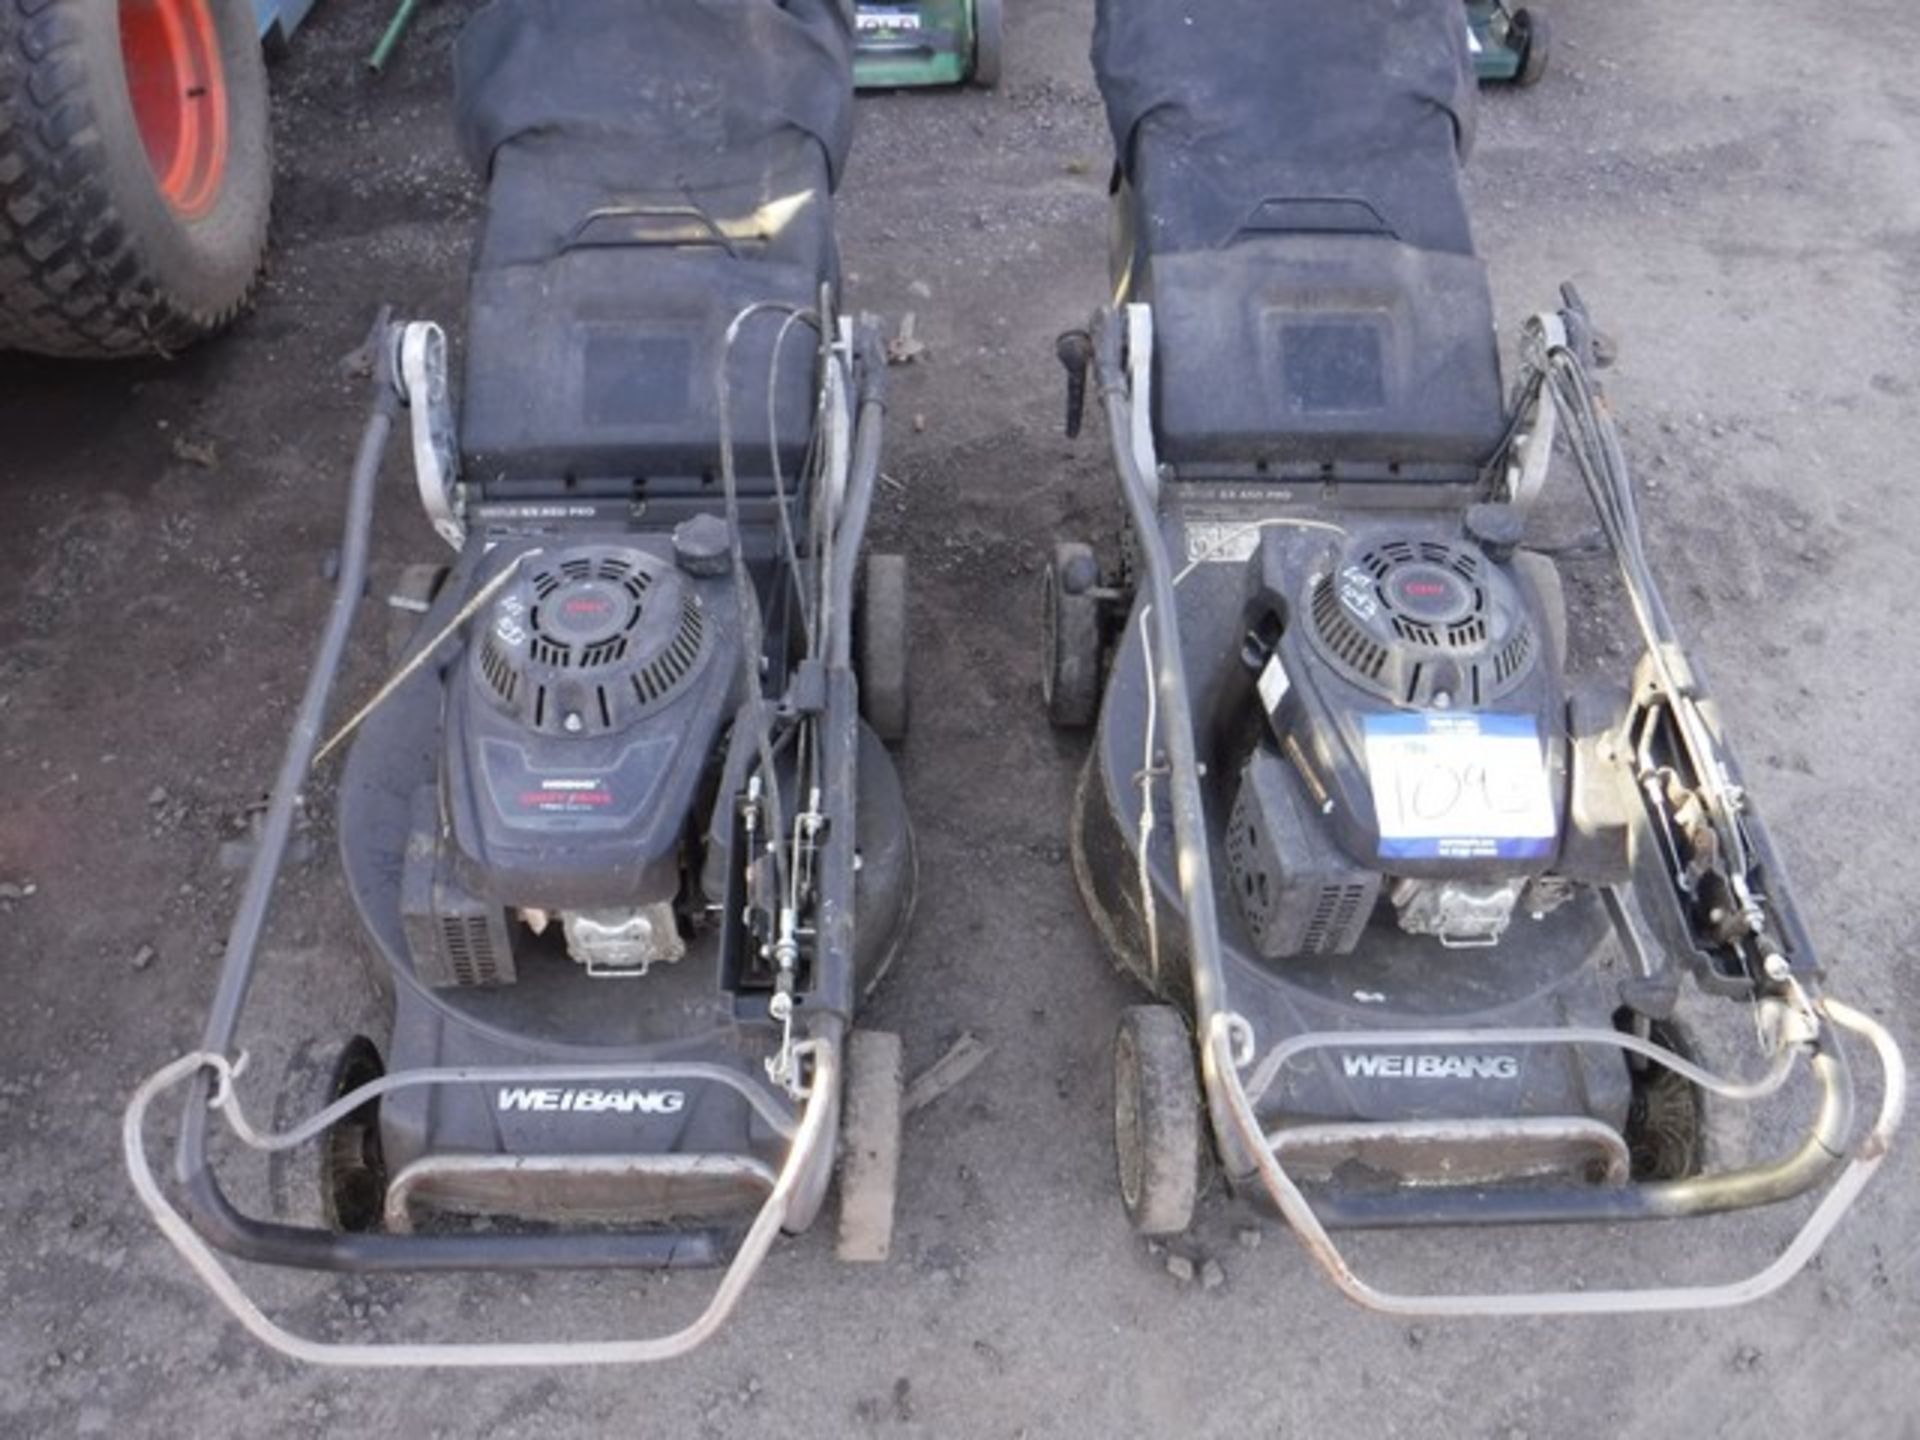 WEIBANG LAWNMOWERS x2 196CC 98DB C/W BACK BOXES ***SPARES OR REPAIR*** ASSET NO. - P040197 - P040202